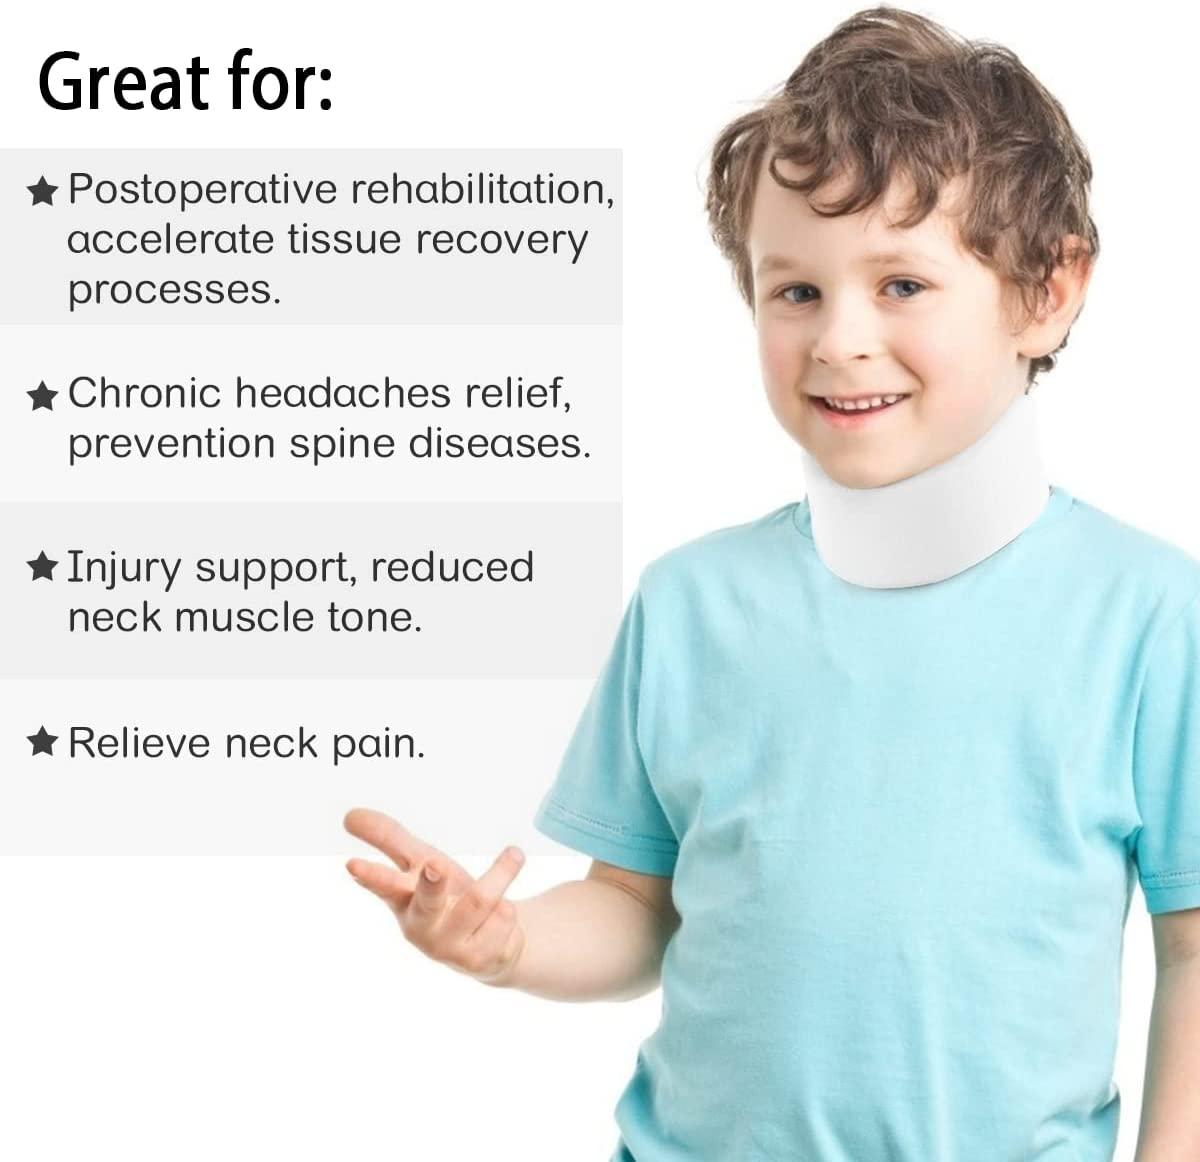 HKJD Kids Neck Brace for Neck Pain and Support - Soft Foam Pediatric Cervical  Collar for Sleeping - Adjustable Youth Neck Support for Children Whiplash,  Torticollis and Injury Support (M) Medium